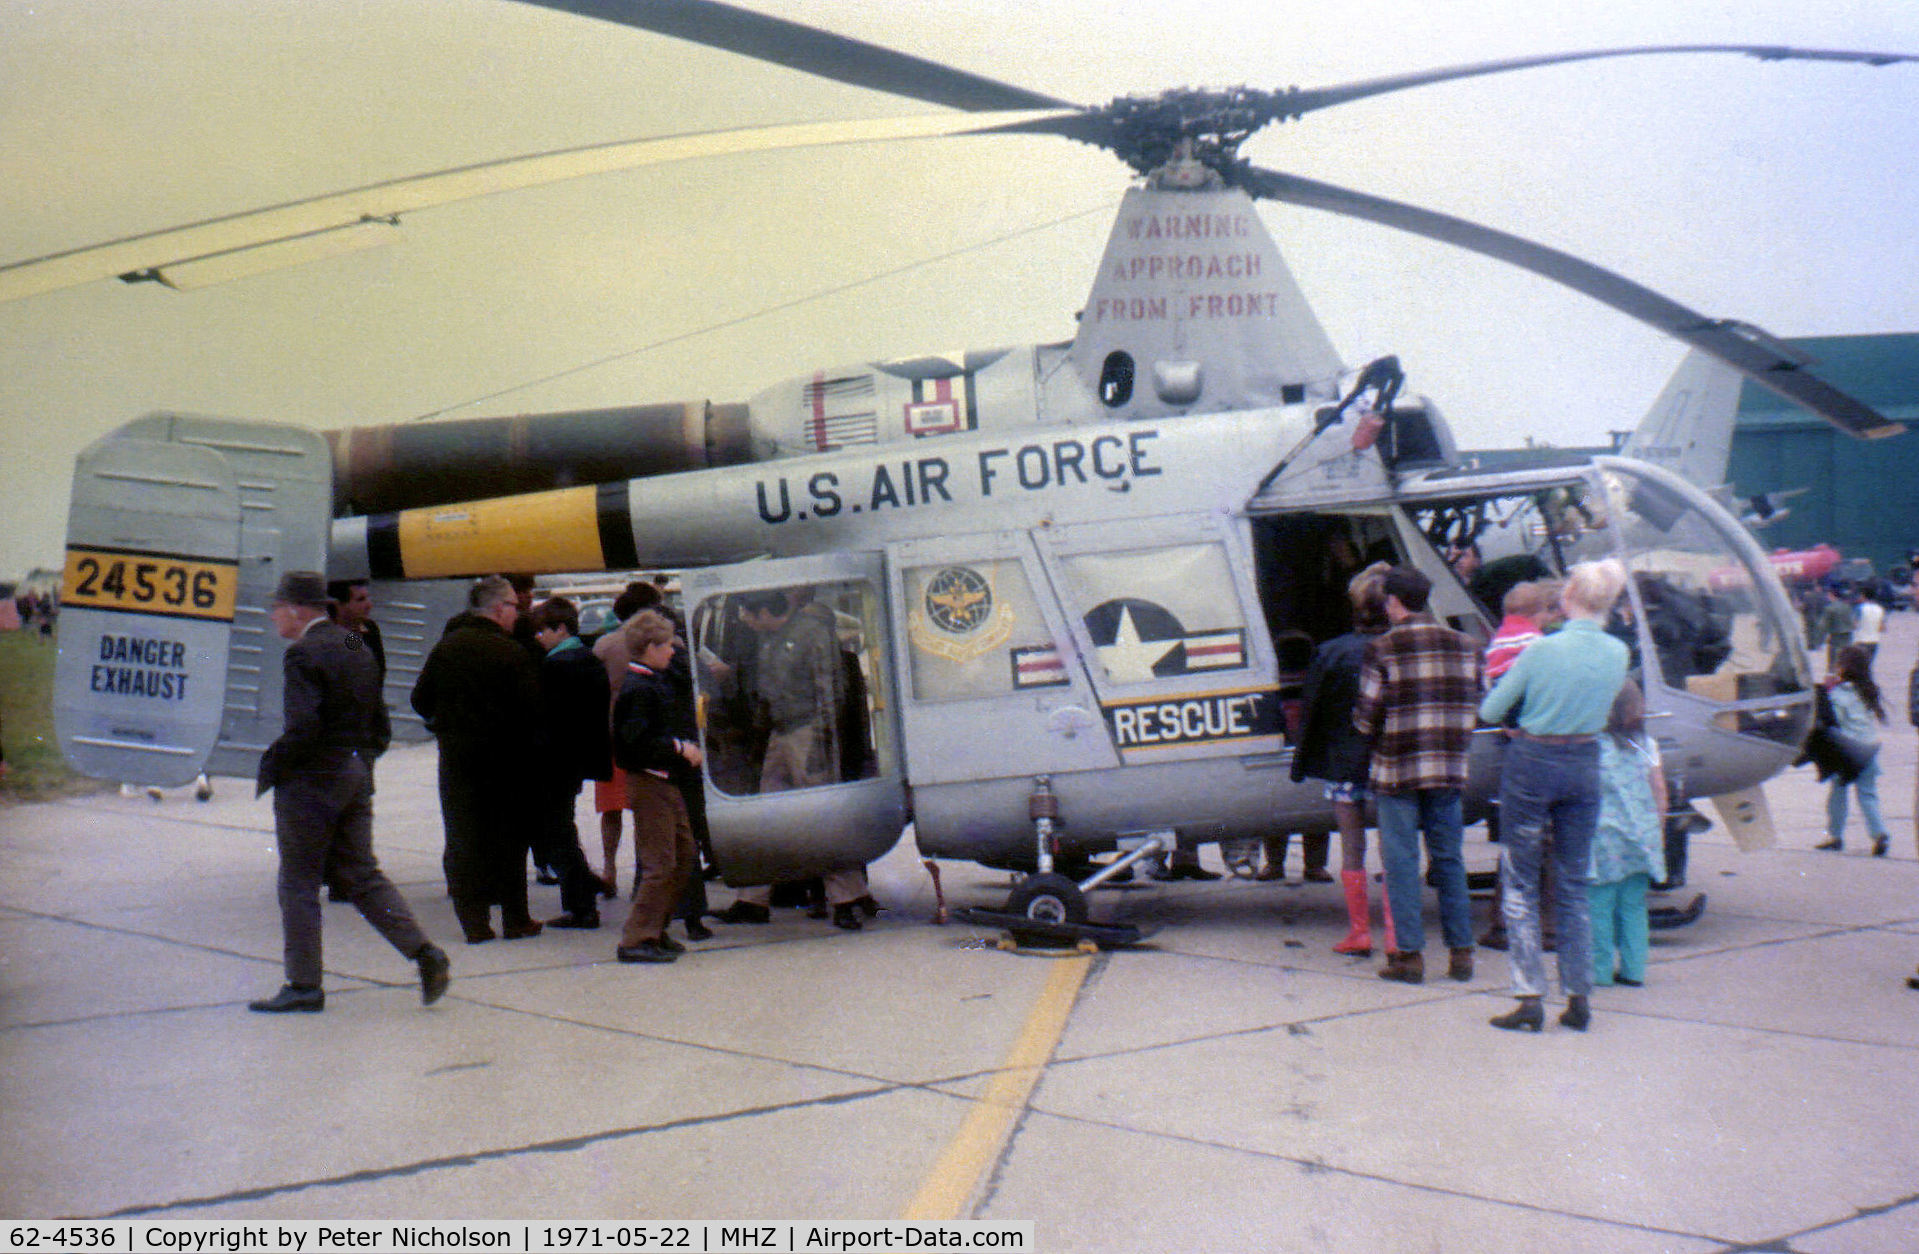 62-4536, 1962 Kaman HH-43B Huskie C/N 162, HH-43B Huskie of Detachment 3 40th Air Rescue & Recovery Wing based at RAF Lakenheath on display at the 1971 RAF Mildenhall Air Fete.